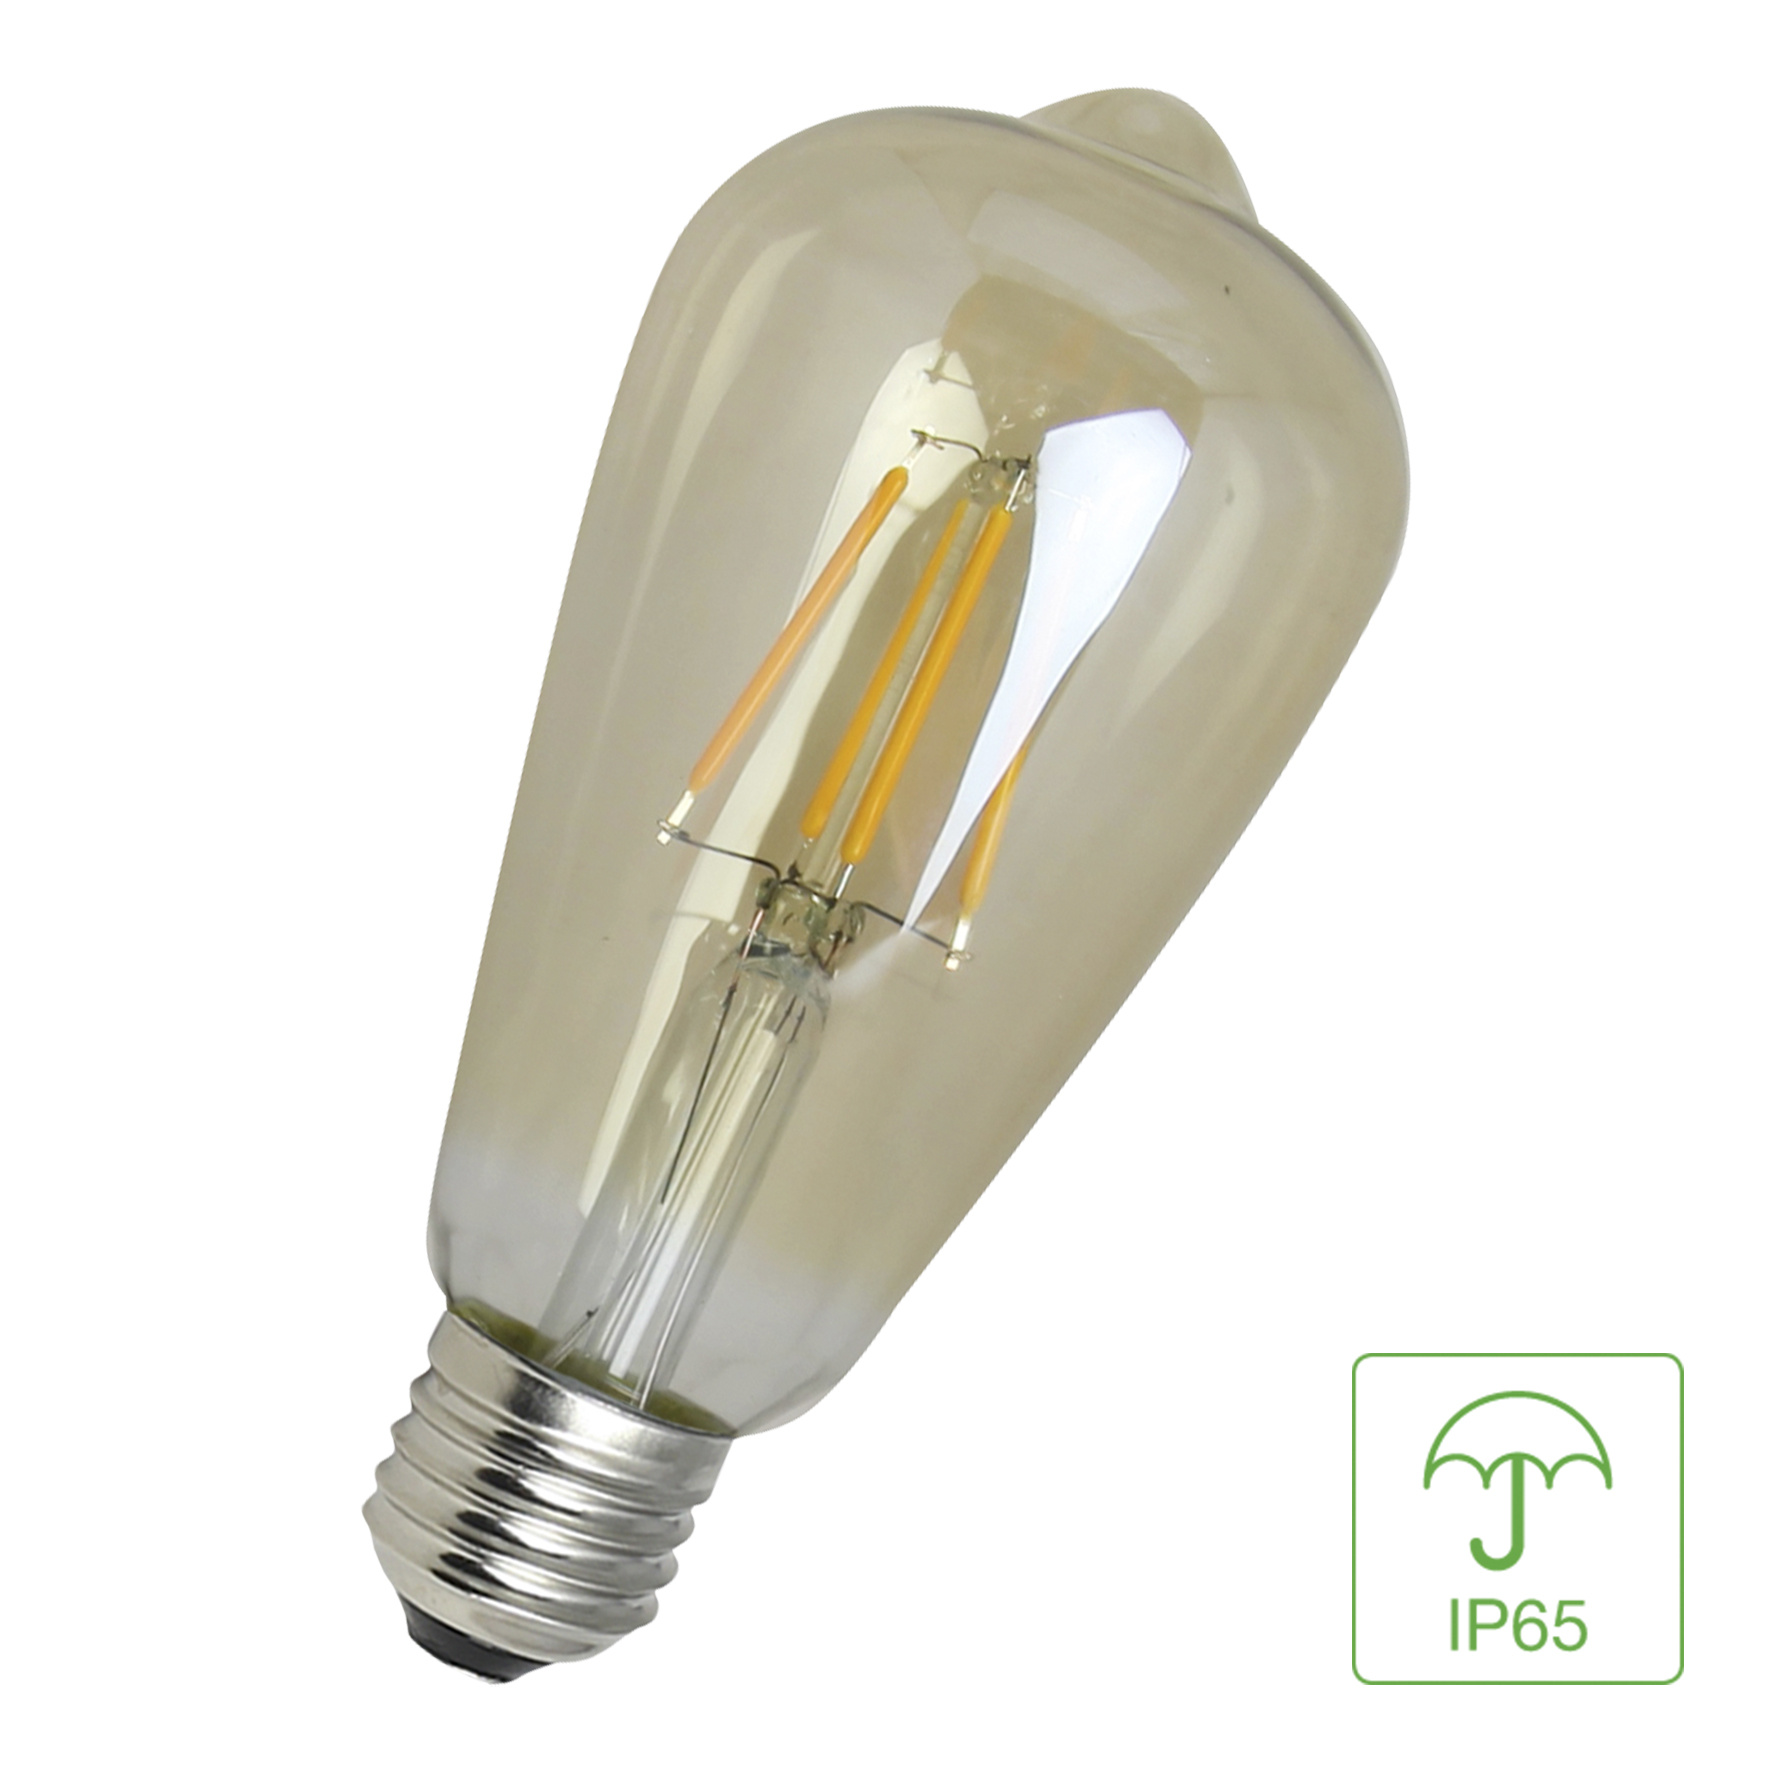 LED FIL Outdoor ST64 E27 4W (32W) 350lm 822 Base down Gold